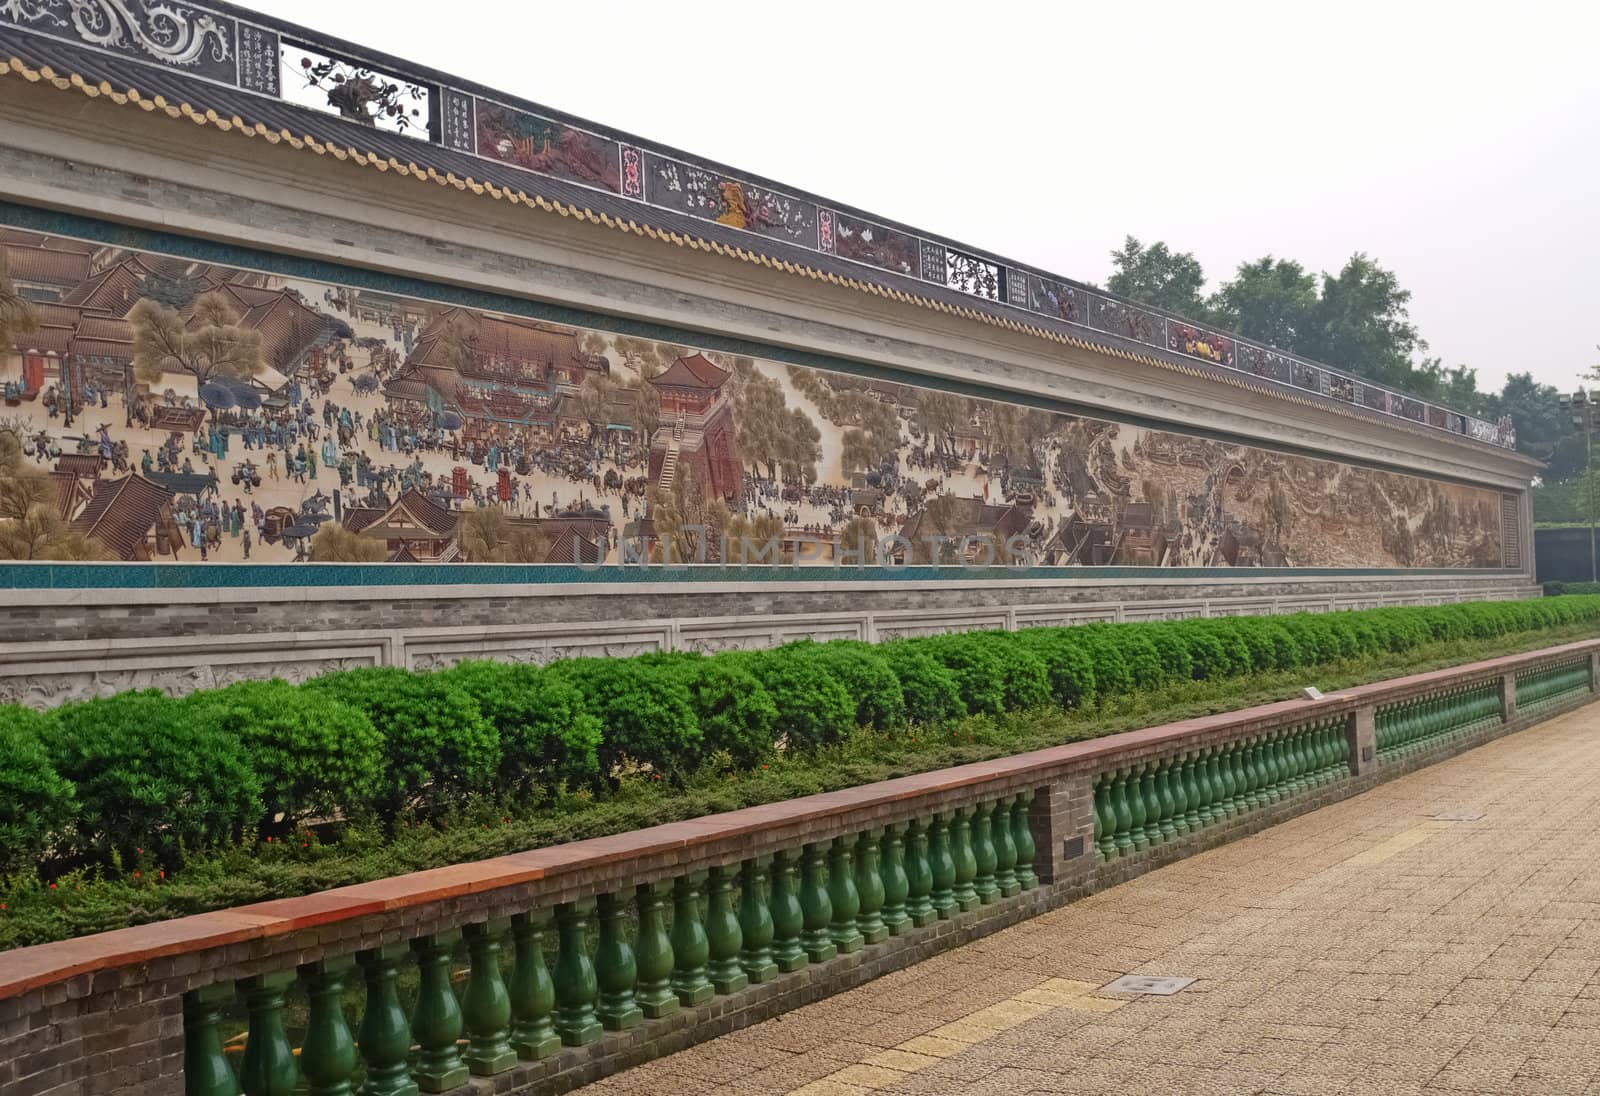 Bao Mo Garden, built at the end of the Qing Dynasty, covering an area of 5 mu, was damaged in the 1950s. It was rebuilt in 1995. It took five years to finish renovating Bao Mo Garden. Now it is enlarged a lot and covers an area of about 100 mu. It is a park of garden arts with the integration of the cultures of Qing period, architectural characteristics of ancient Canton, landscape art of Linnan, and Zhujiang style.